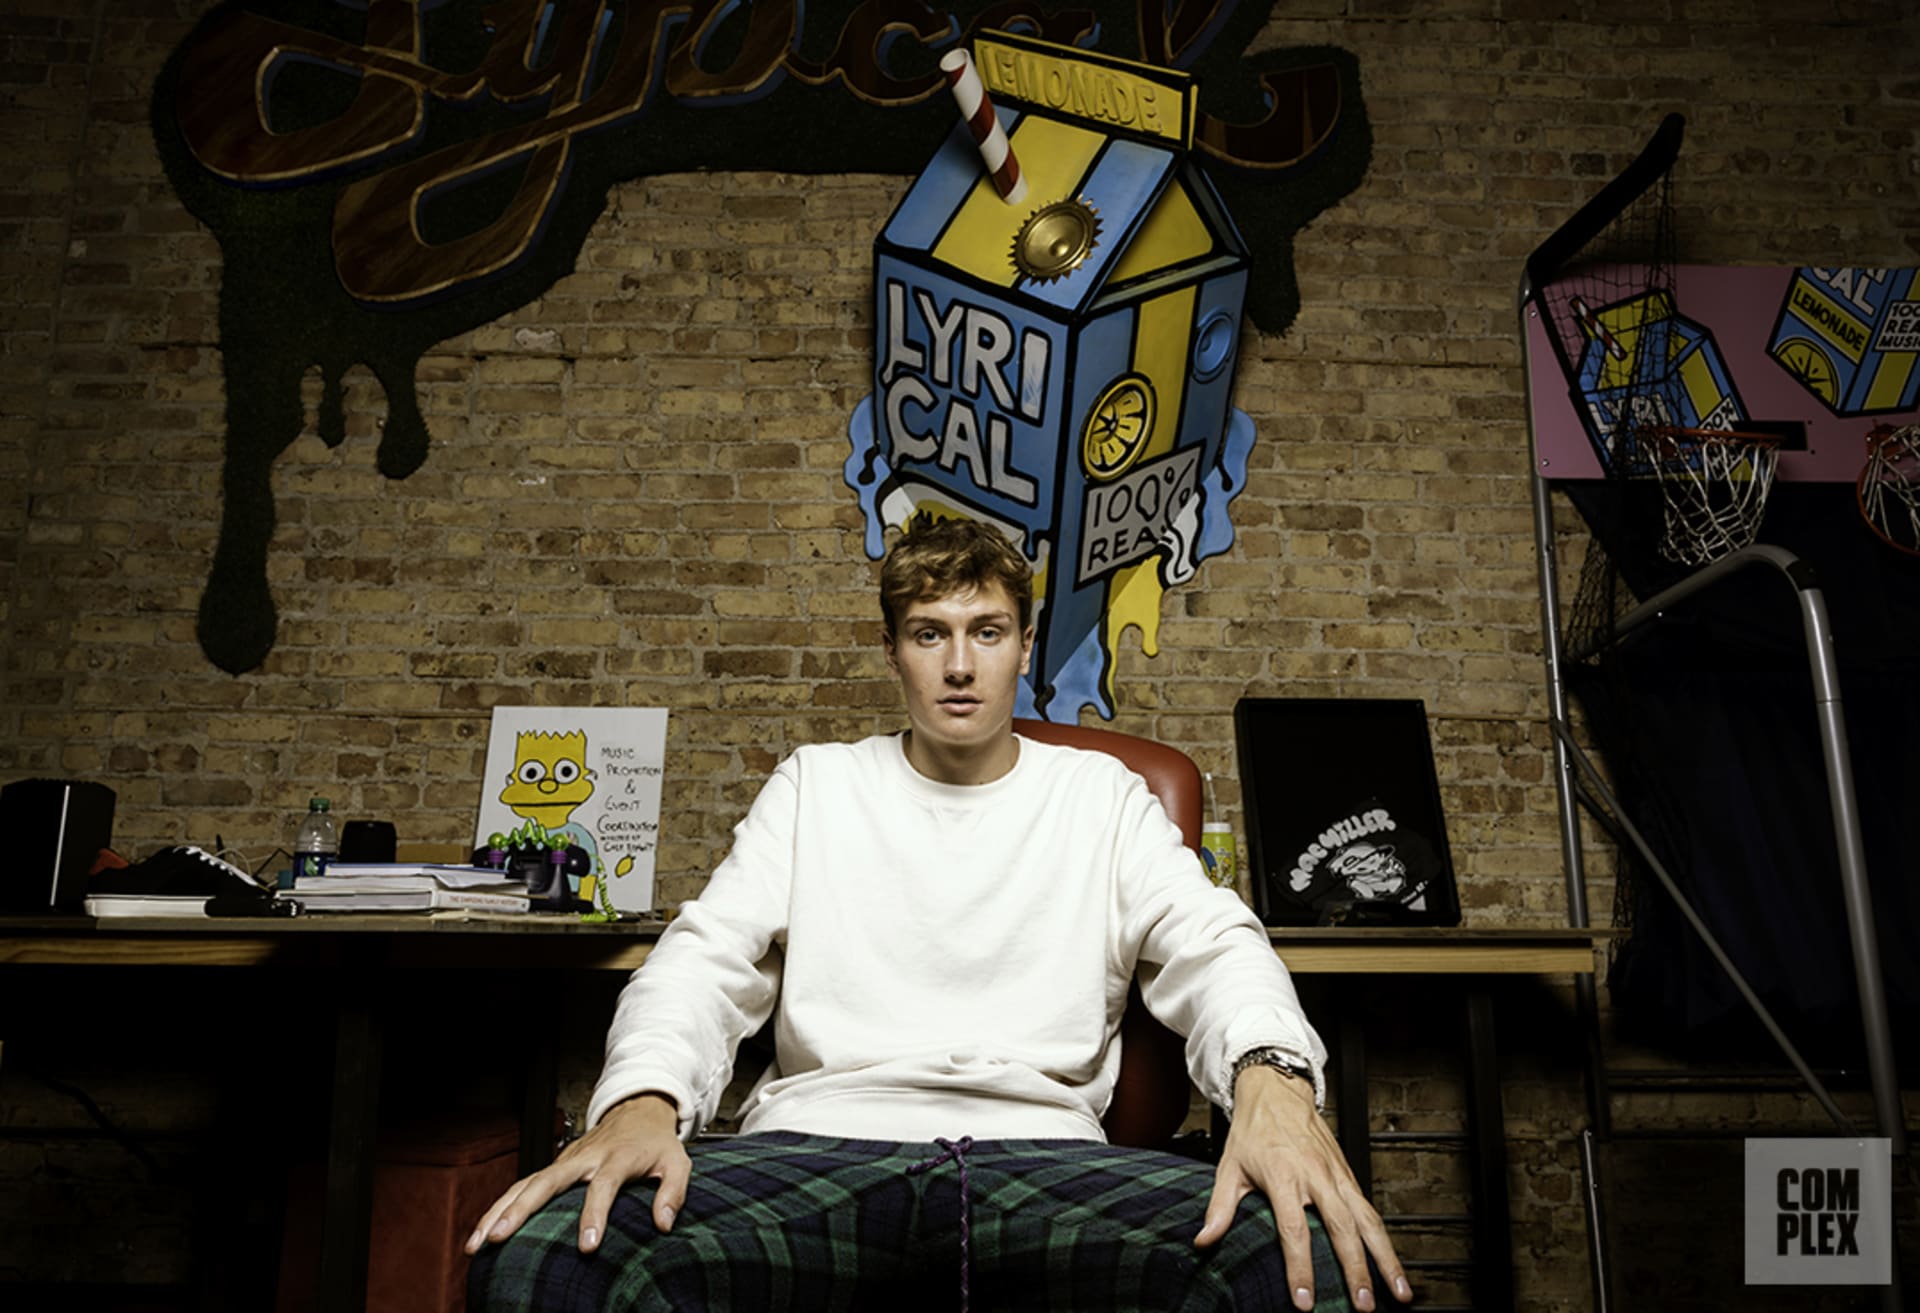 Photo of Cole Bennett, who is a white man with short blonde hair. He is wearing a long sleeve white shirt and green and navy plaid pants. Behind him, you can see a brick wall with a bunch of Lyrical Lemonade materials. Source: [link] https://www.complex.com/music/2019/07/cole-bennett-interview-lyrical-lemonade-chicago

